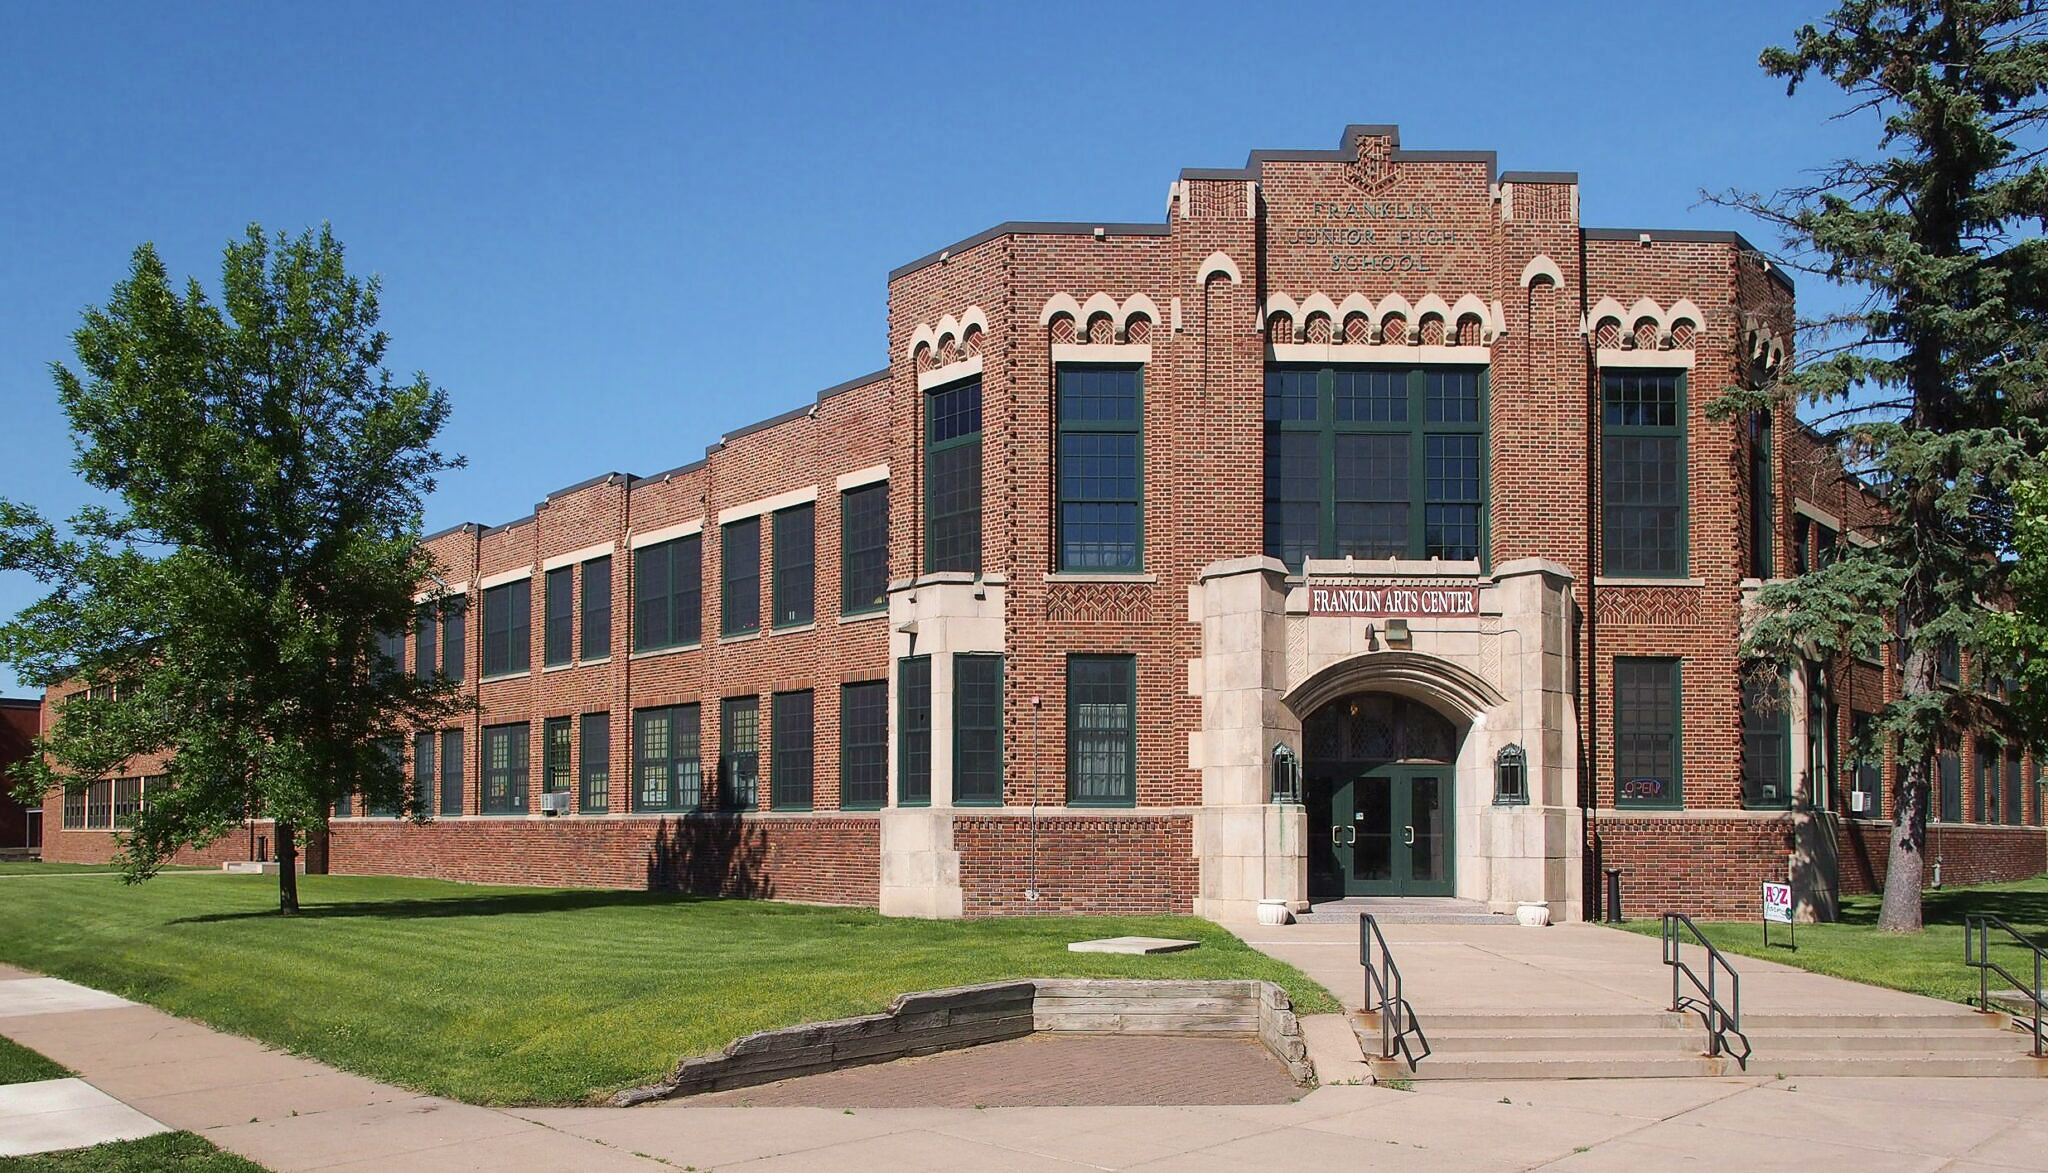 A large brown brick building with a banner on the front that reads "Franklin Arts Center"